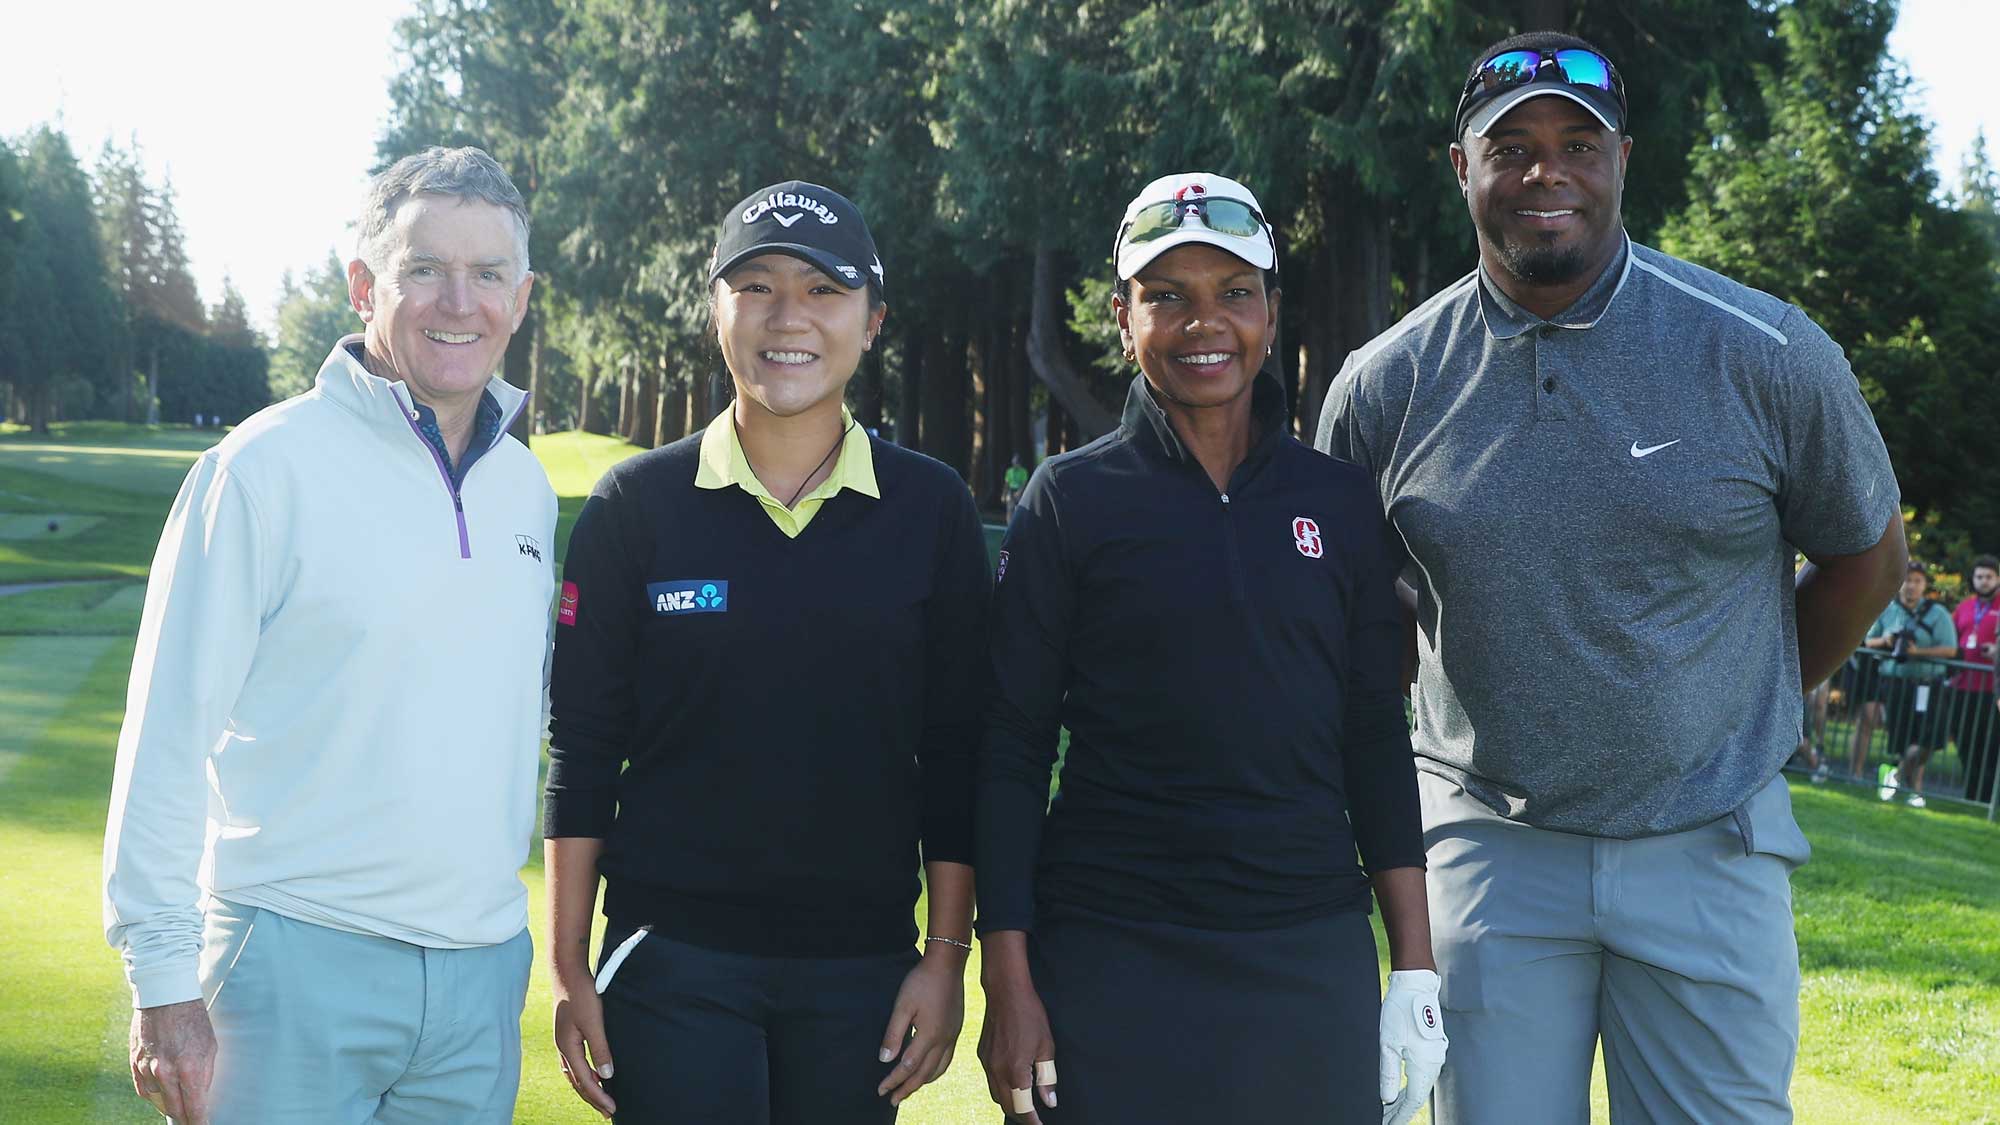 John Veihmeyer of KPMG, Lydia Ko of New Zealand, Condoleezza Rice and Ken Griffey Jr. pose together on the first tee during the pro-am prior to the start of the KPMG Women's PGA Championship